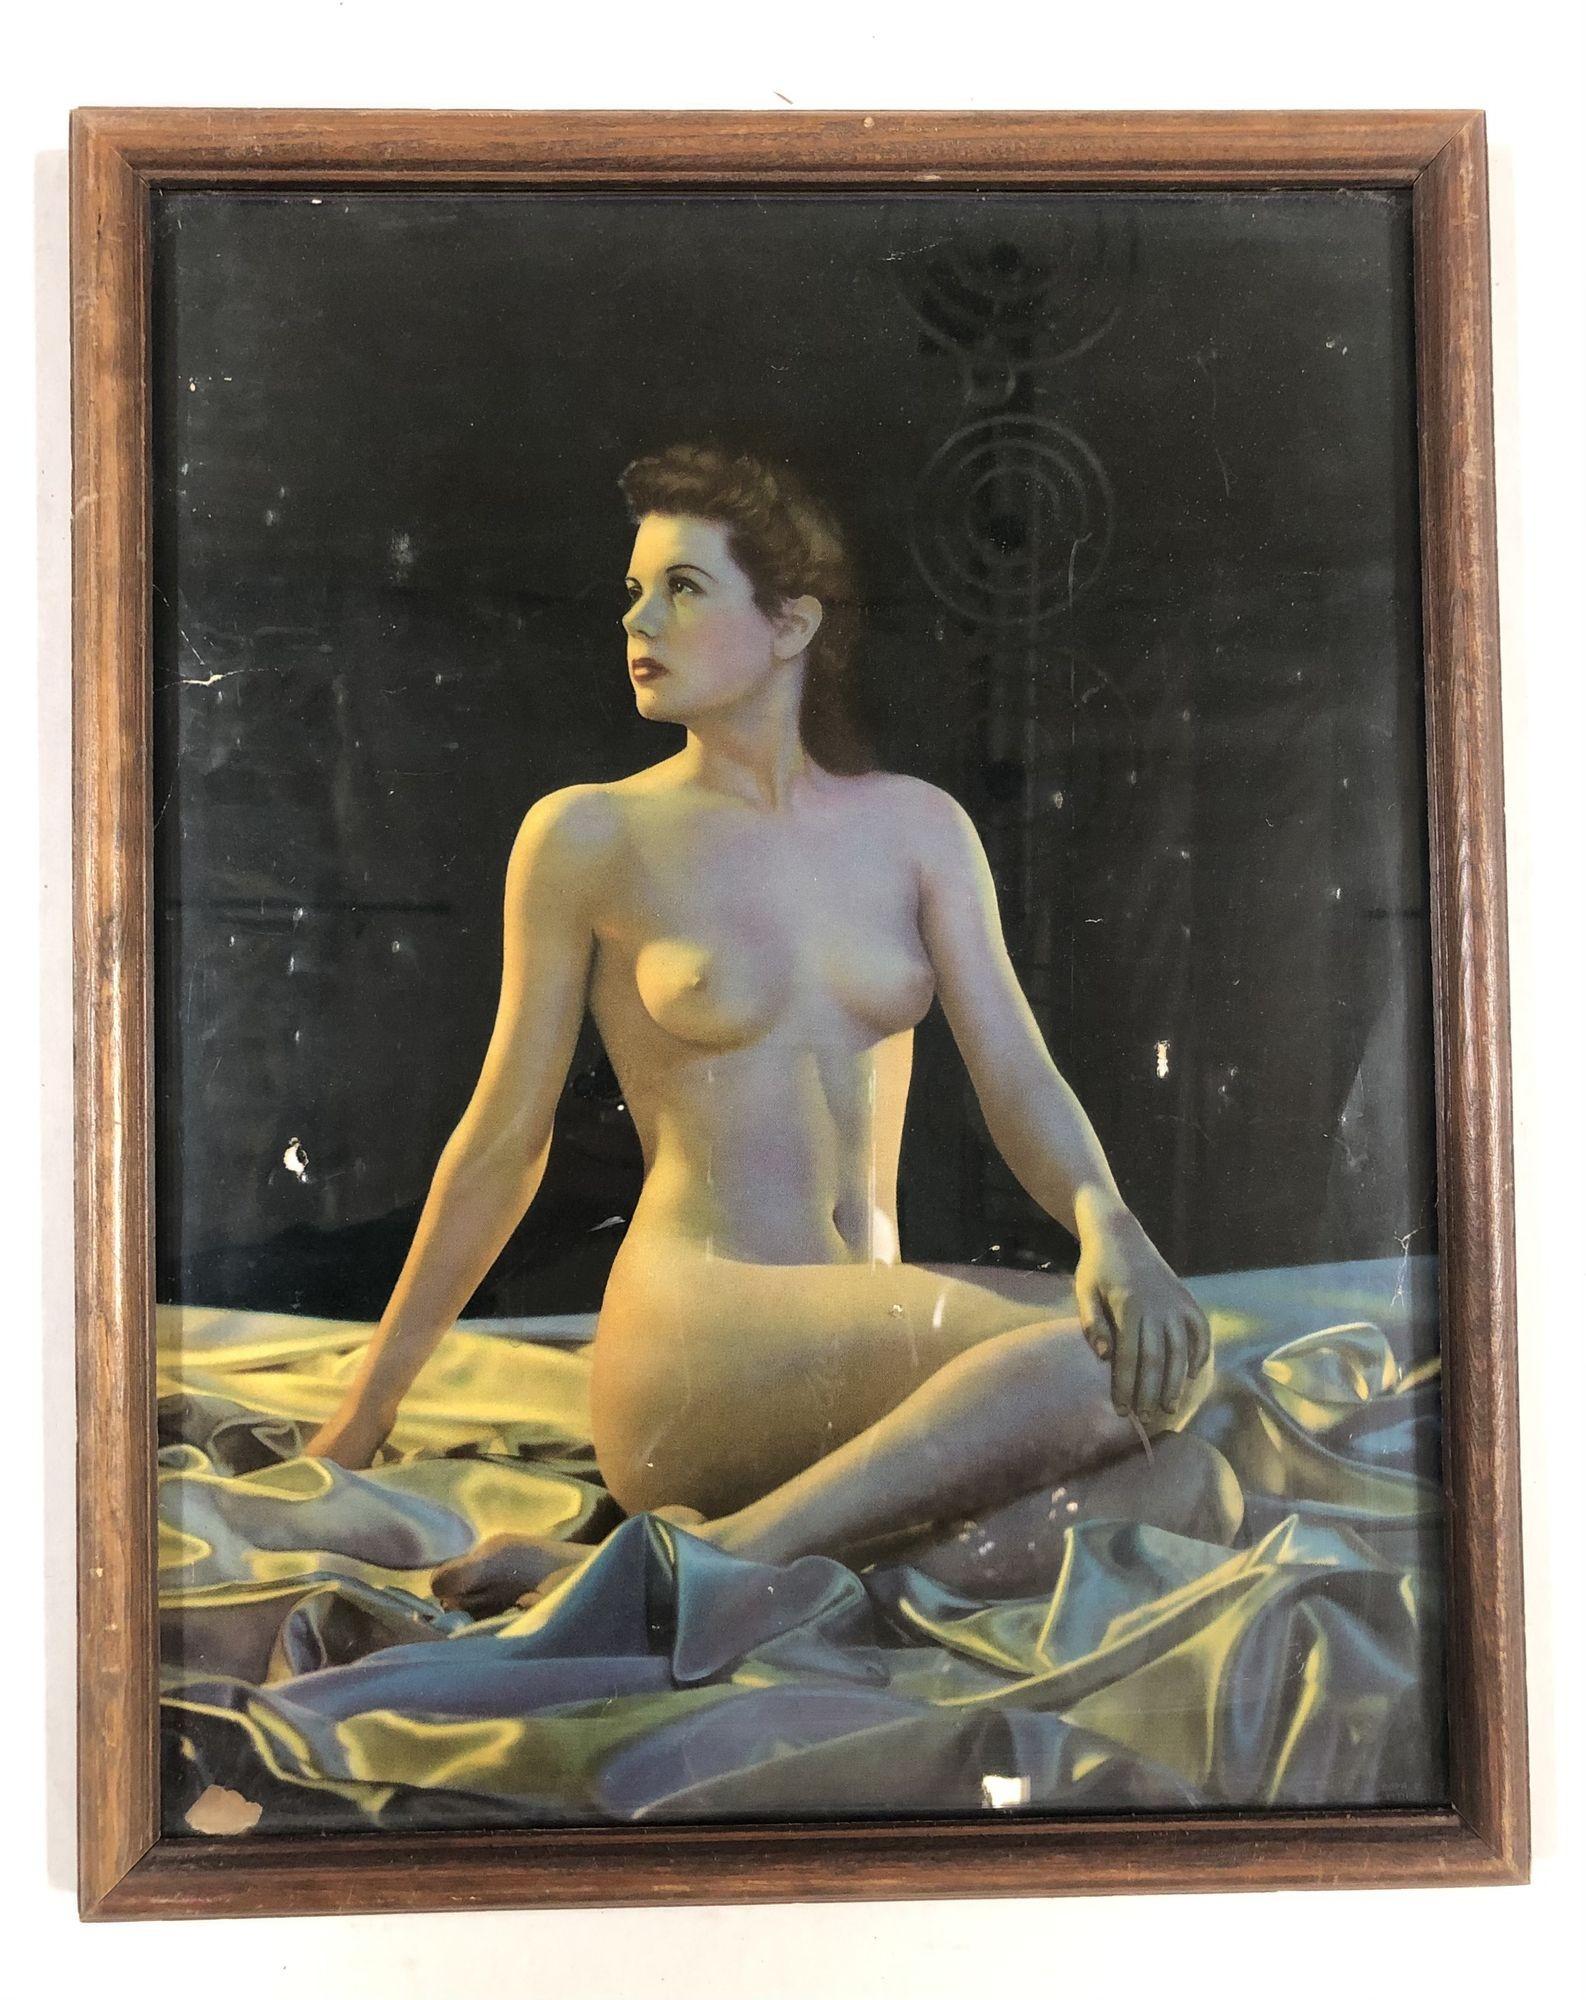 Pin Up Nude Woman Lithograph by Signed C Moss, C 1942 In Excellent Condition For Sale In Van Nuys, CA